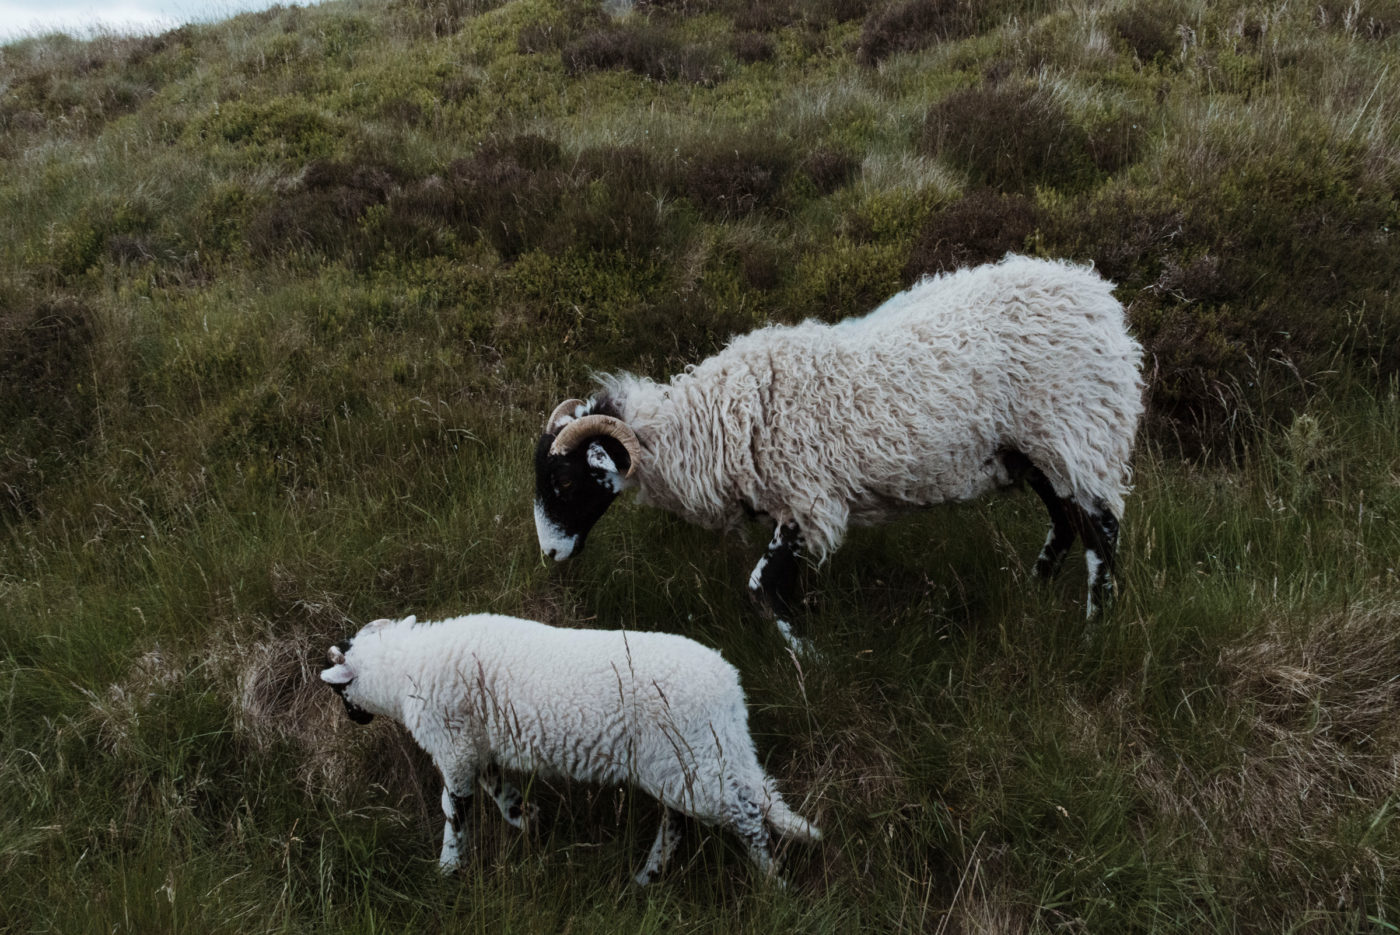 A mother and baby sheep climb up the side of a grassy hill